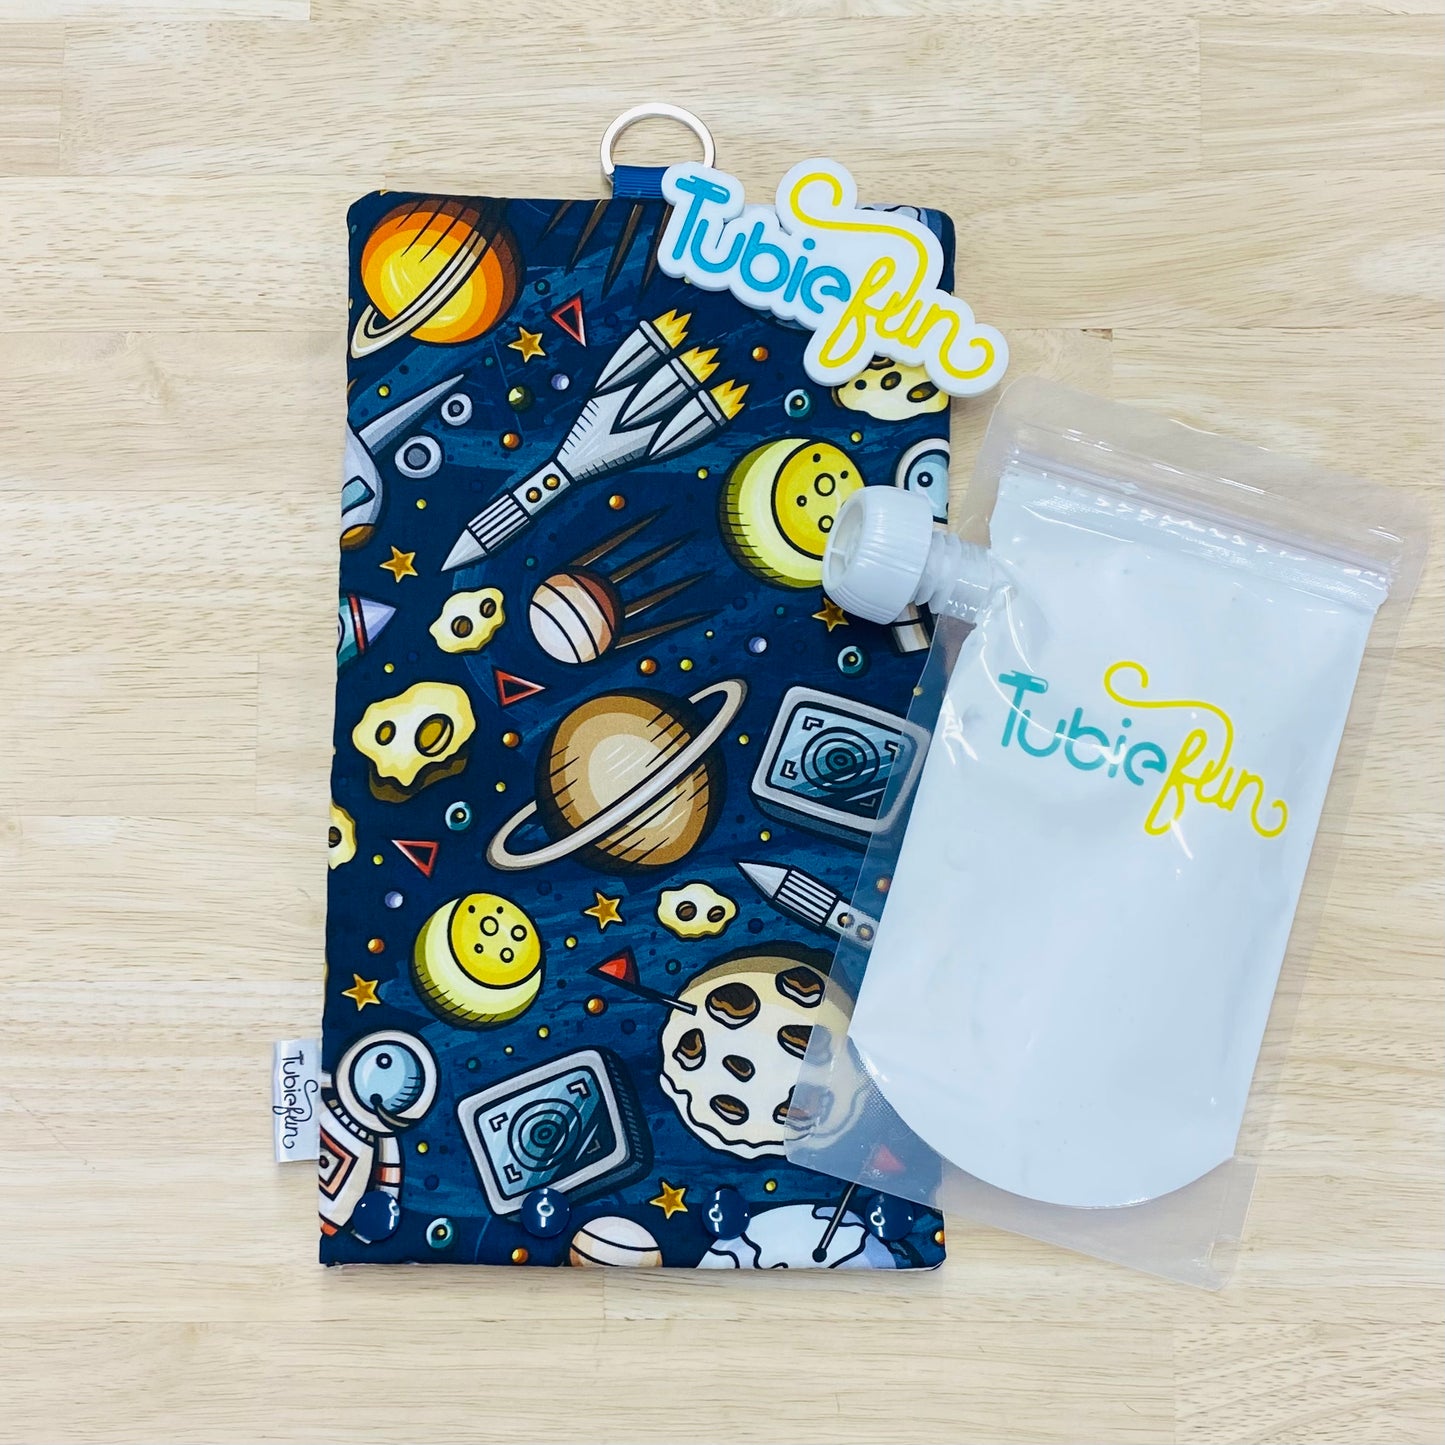 NEW Insulated Milk Bag Suitable for Tubie Fun 500ml Reusable Pouches - Space and Astronauts